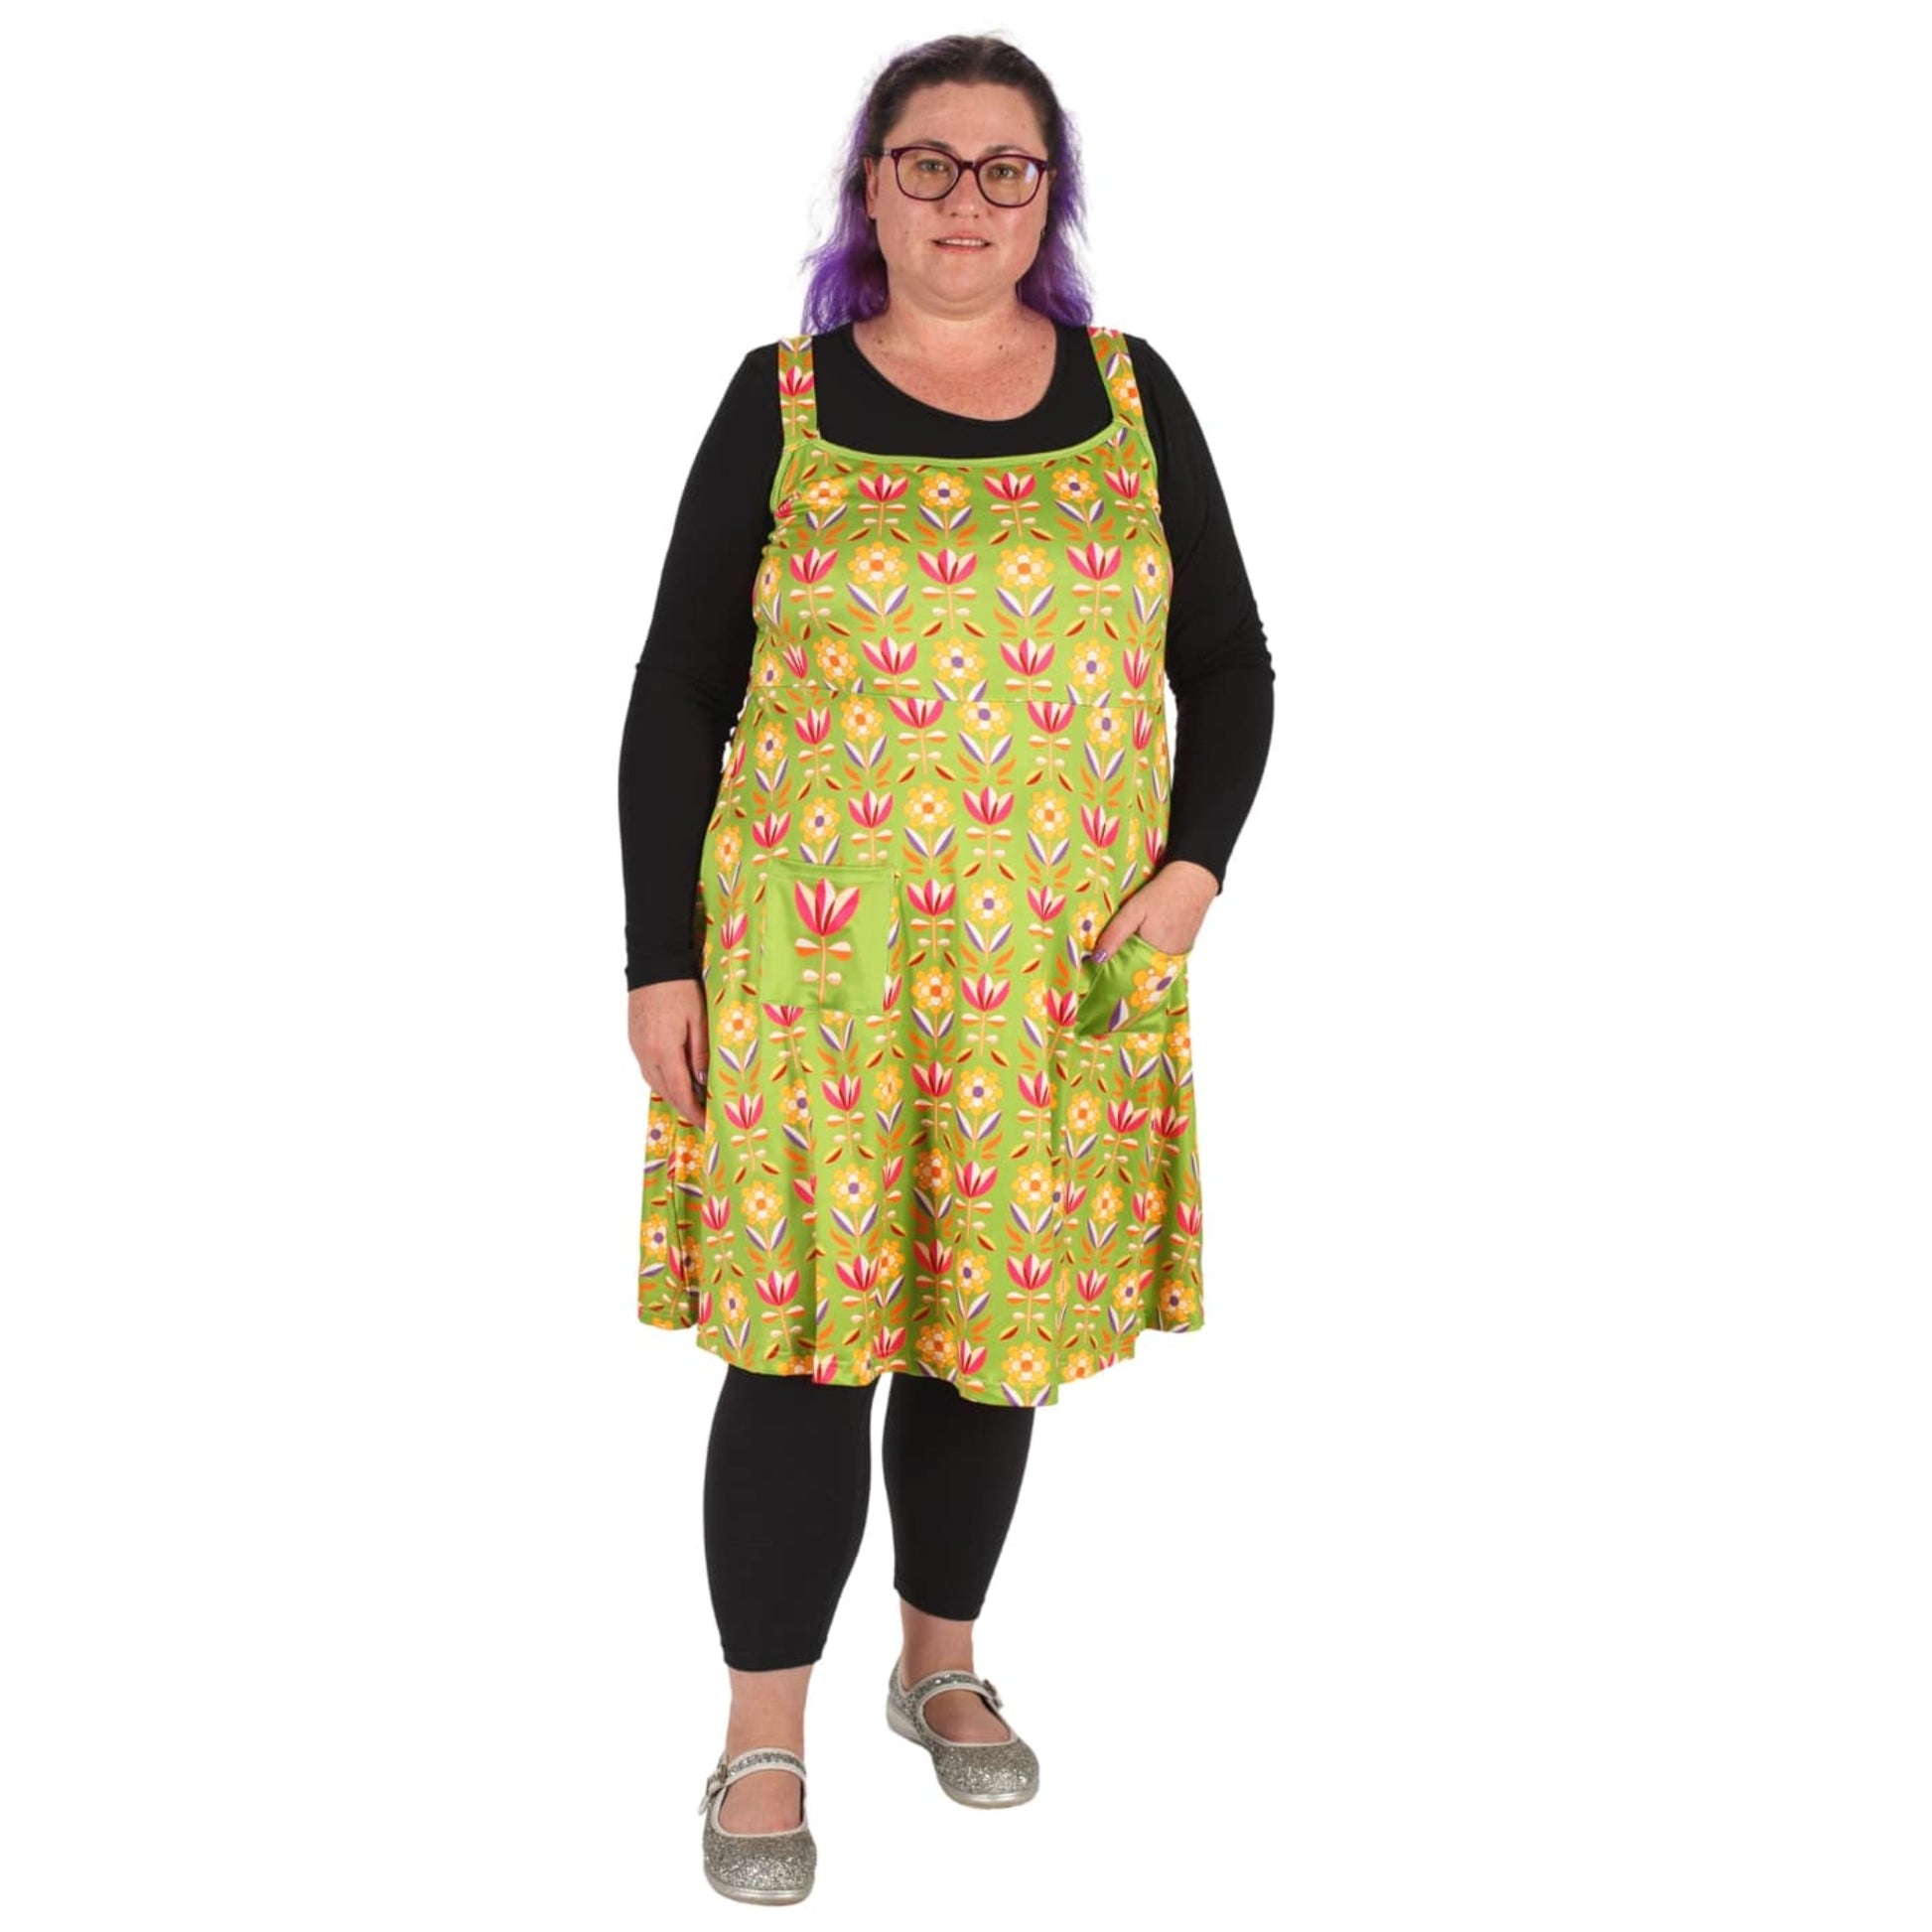 Retro Flower Pinafore by RainbowsAndFairies.com.au (Floral - 70s Wallpaper - Dress With Pockets - Pinny - Kitsch - Rockabilly - Vintage Inspired) - SKU: CL_PFORE_RETFL_ORG - Pic-05